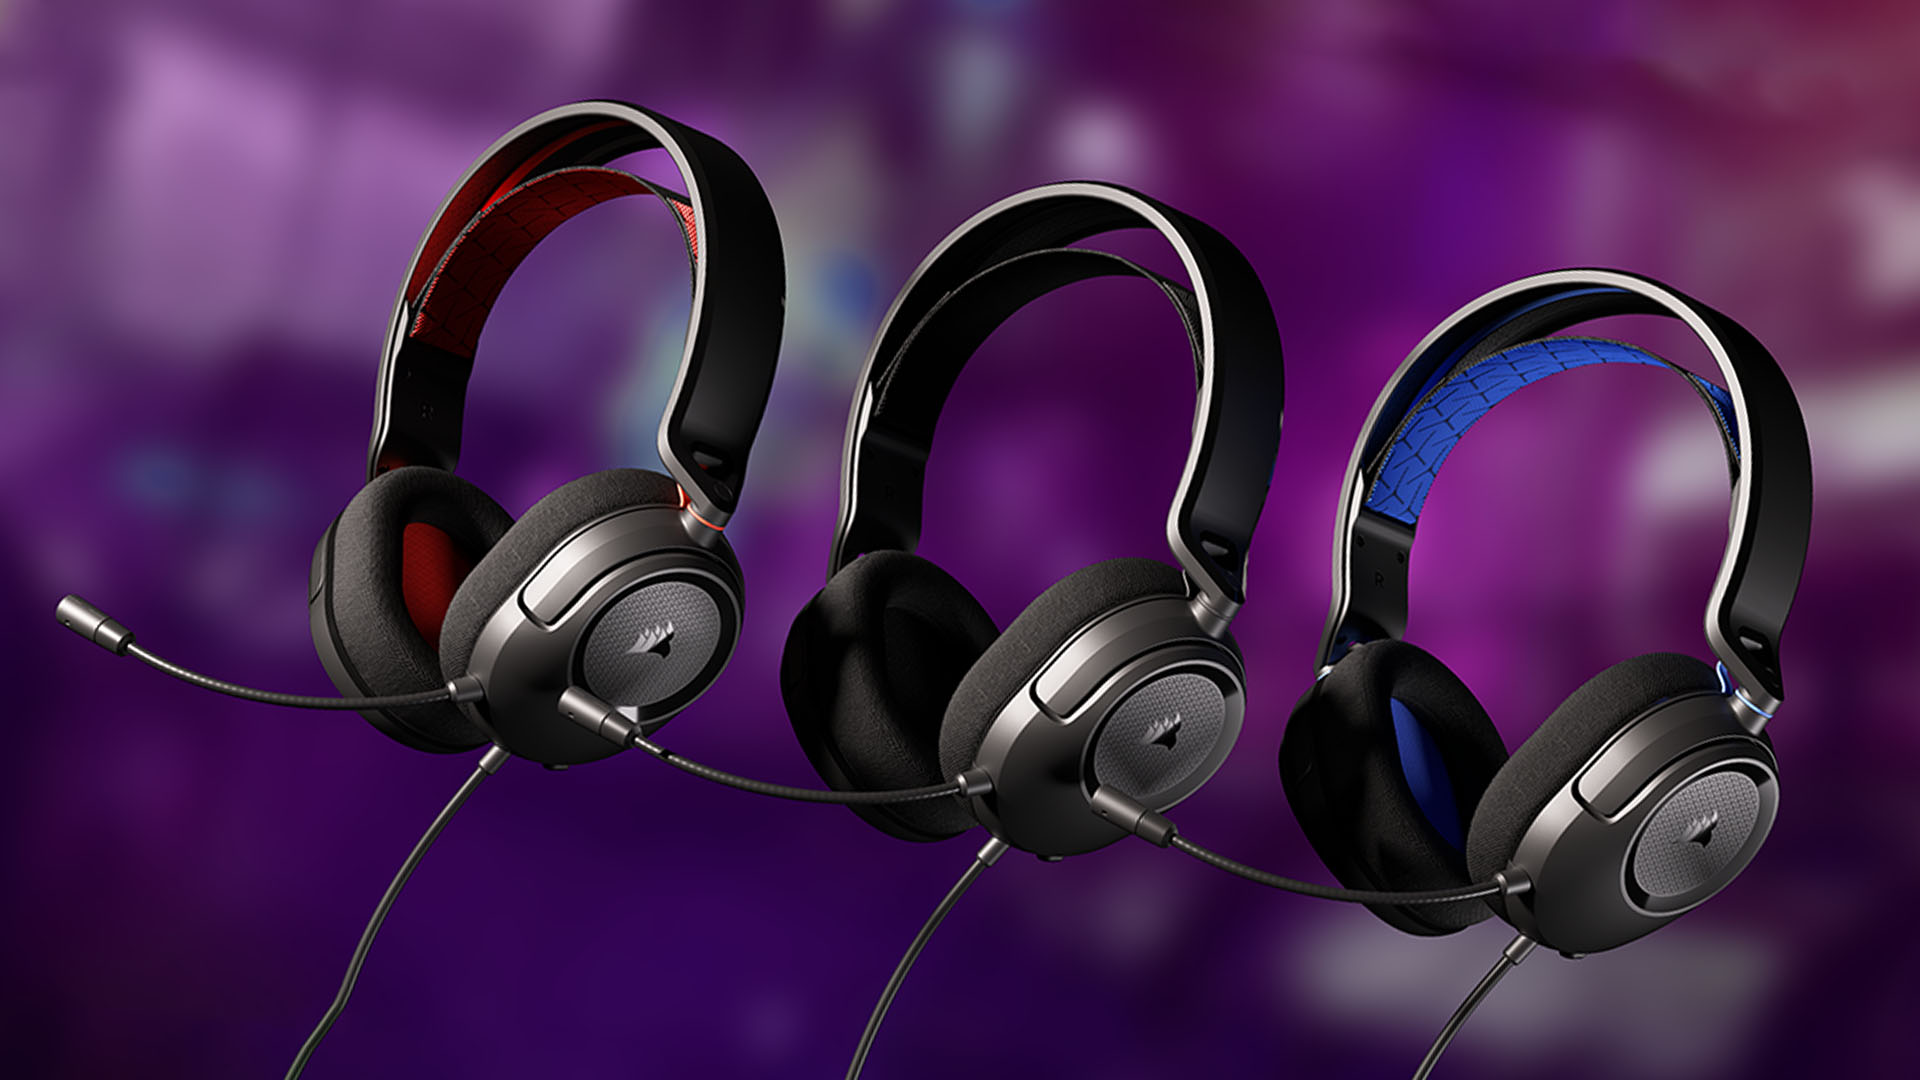 Corsair's budget gaming headsets get an upgrade with big improvements